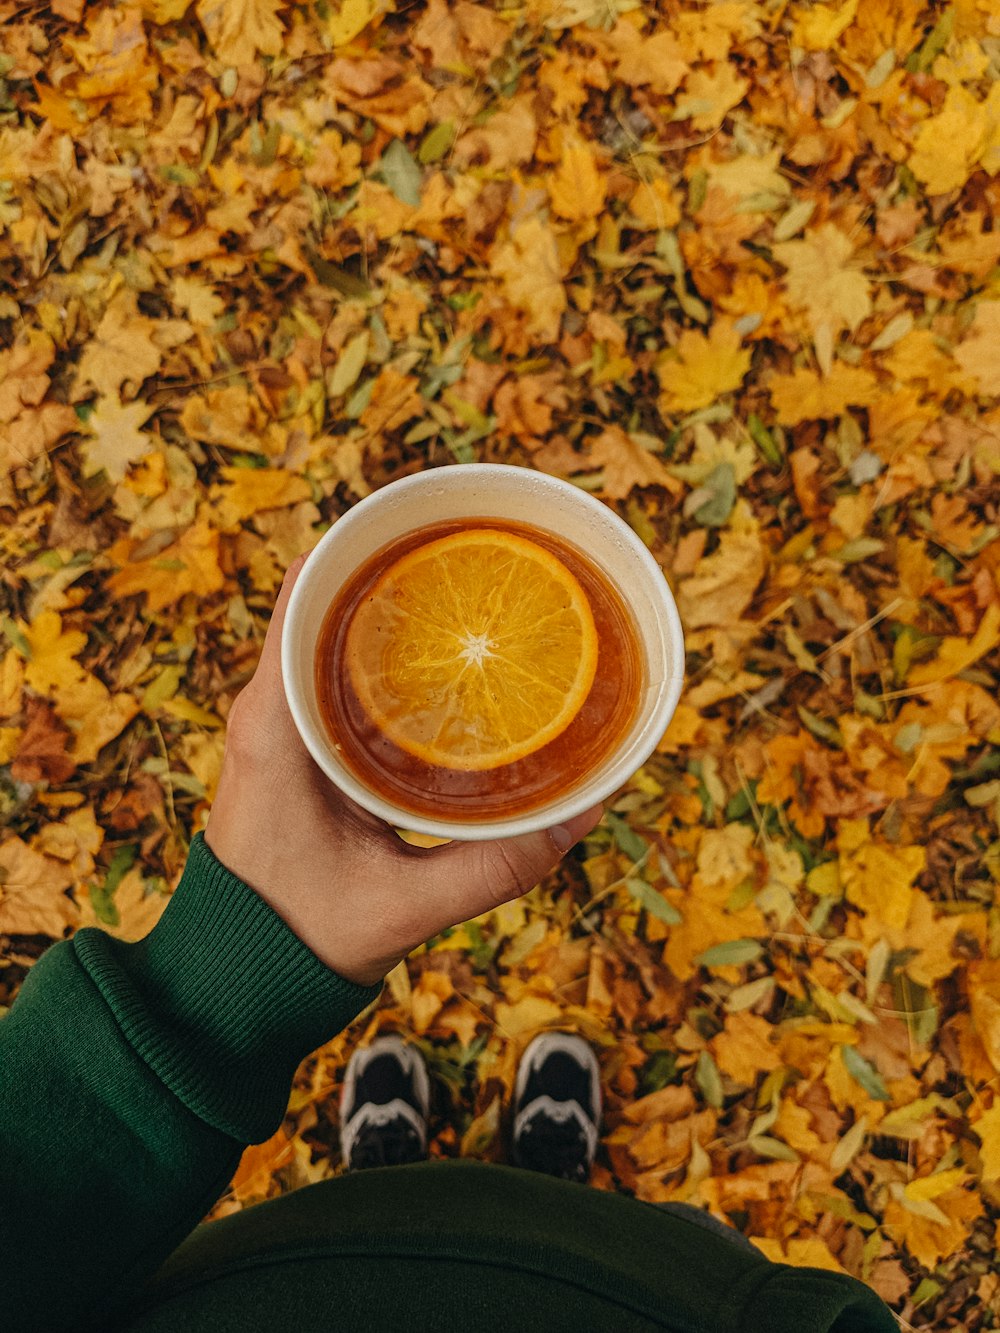 a person holding a cup of tea with an orange slice in it